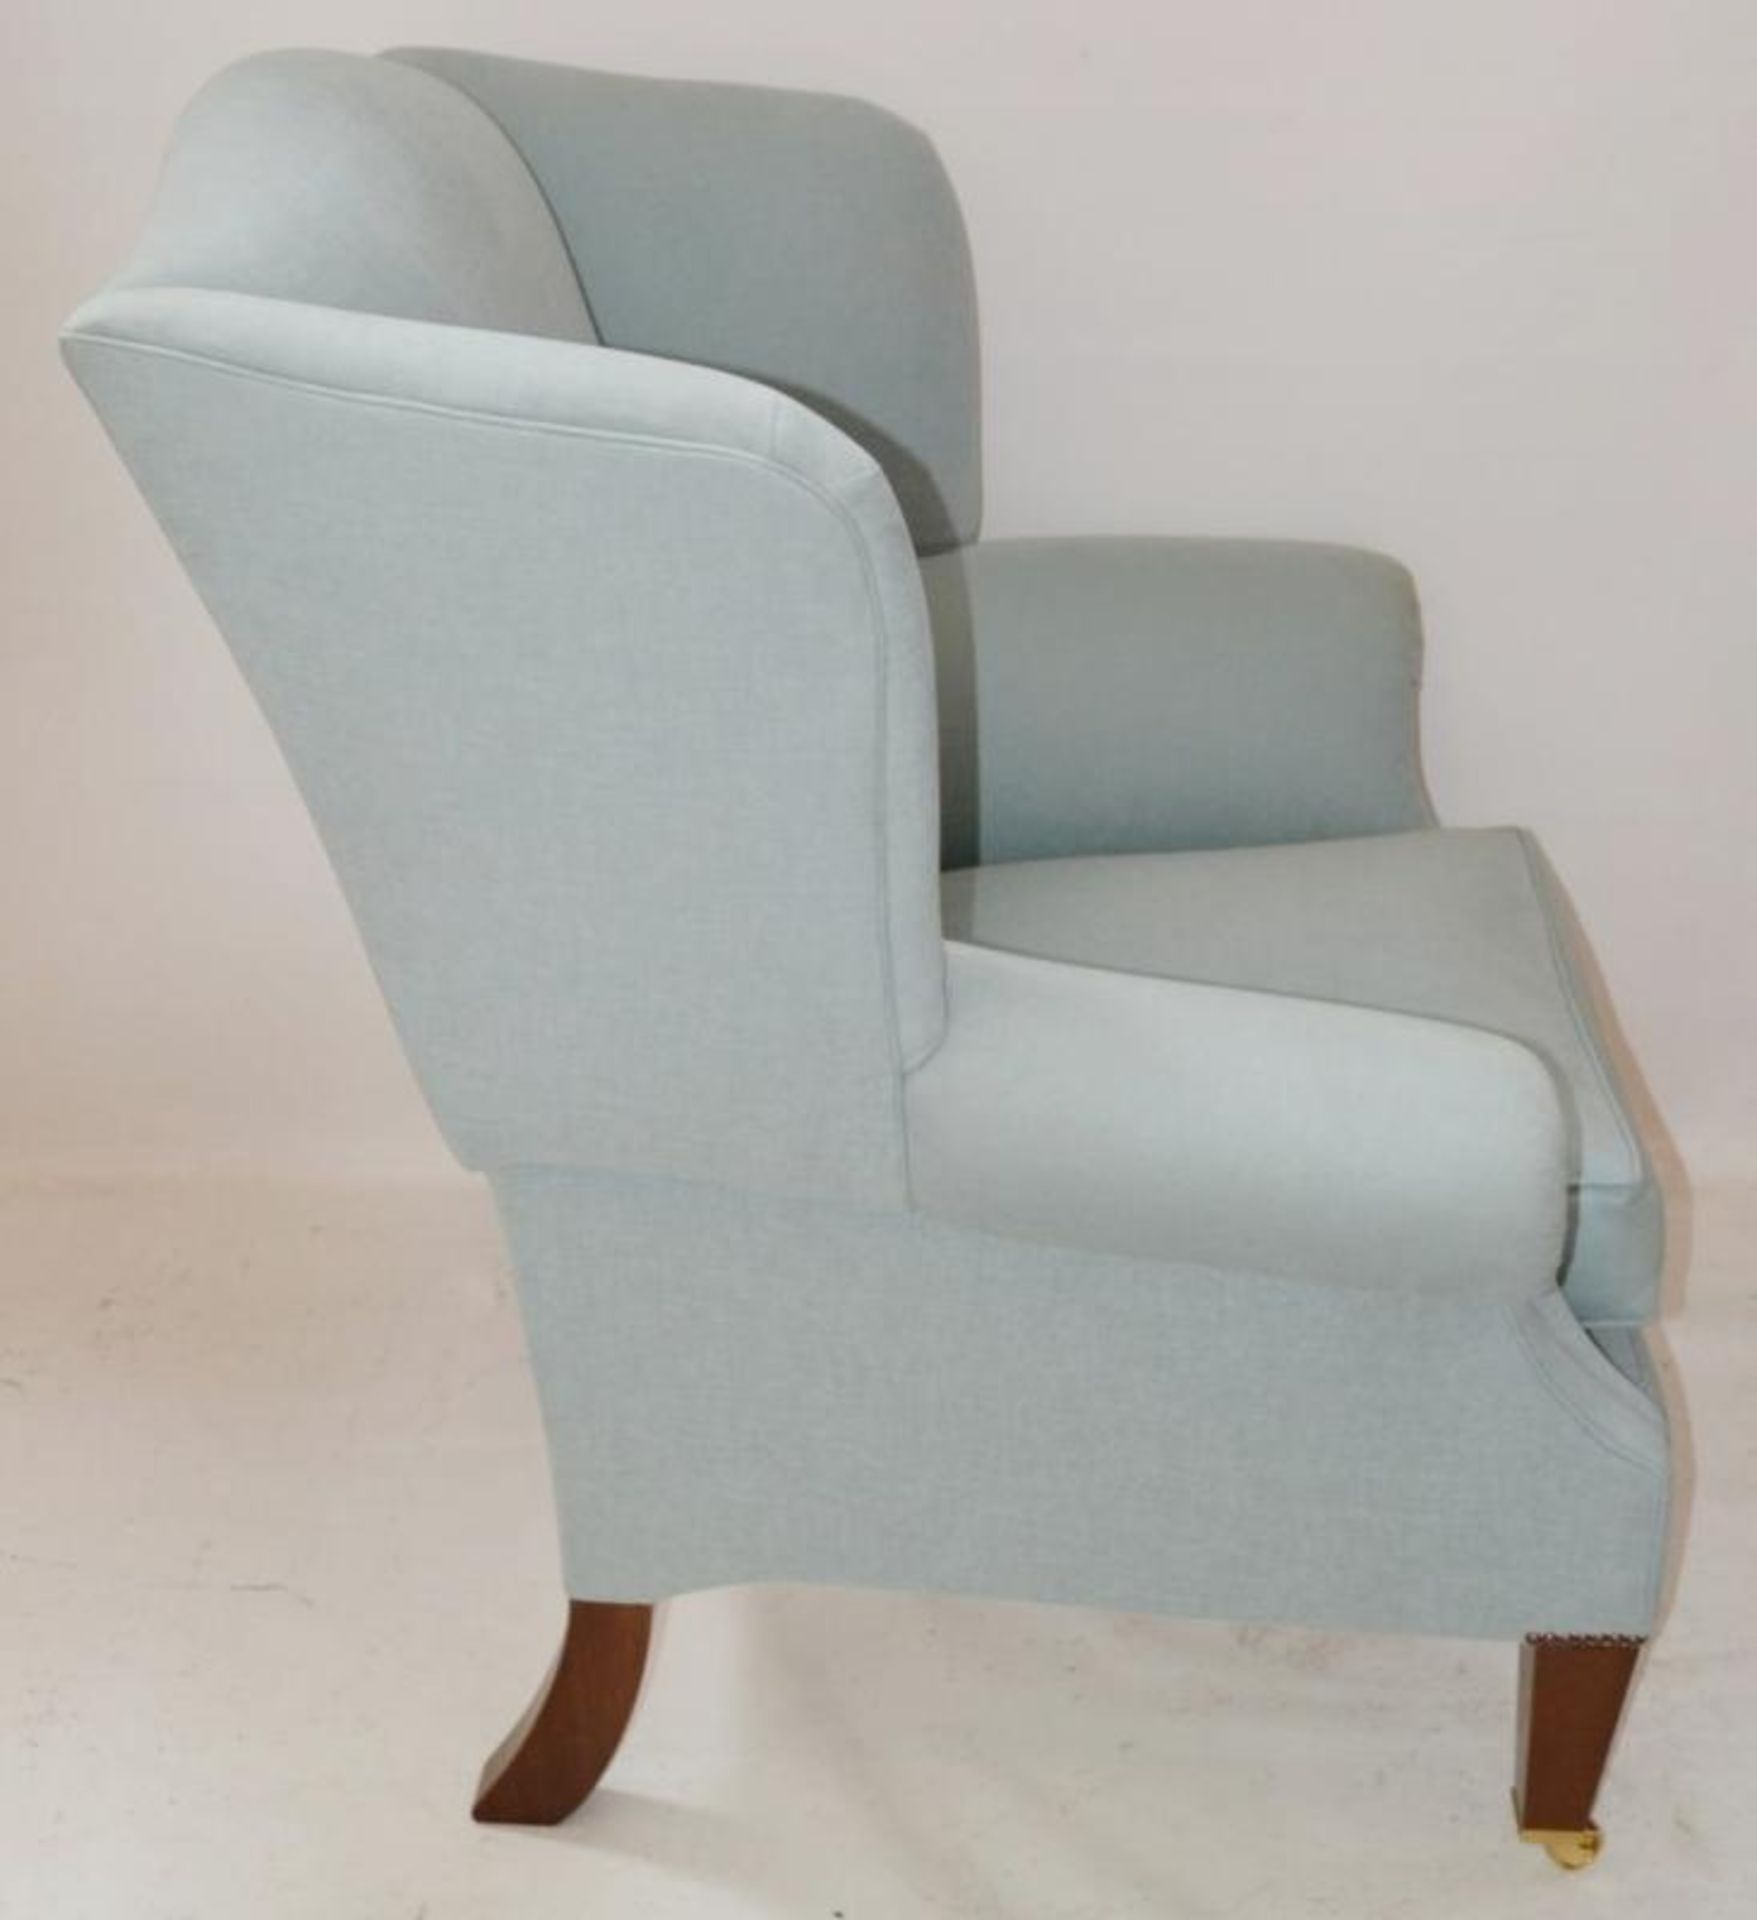 1 x Duresta "Somerset" Wing Chair Light Blue - Dimensions: 113H x 91W x 92D cms - Ref: 3143184-A NP1 - Image 7 of 7